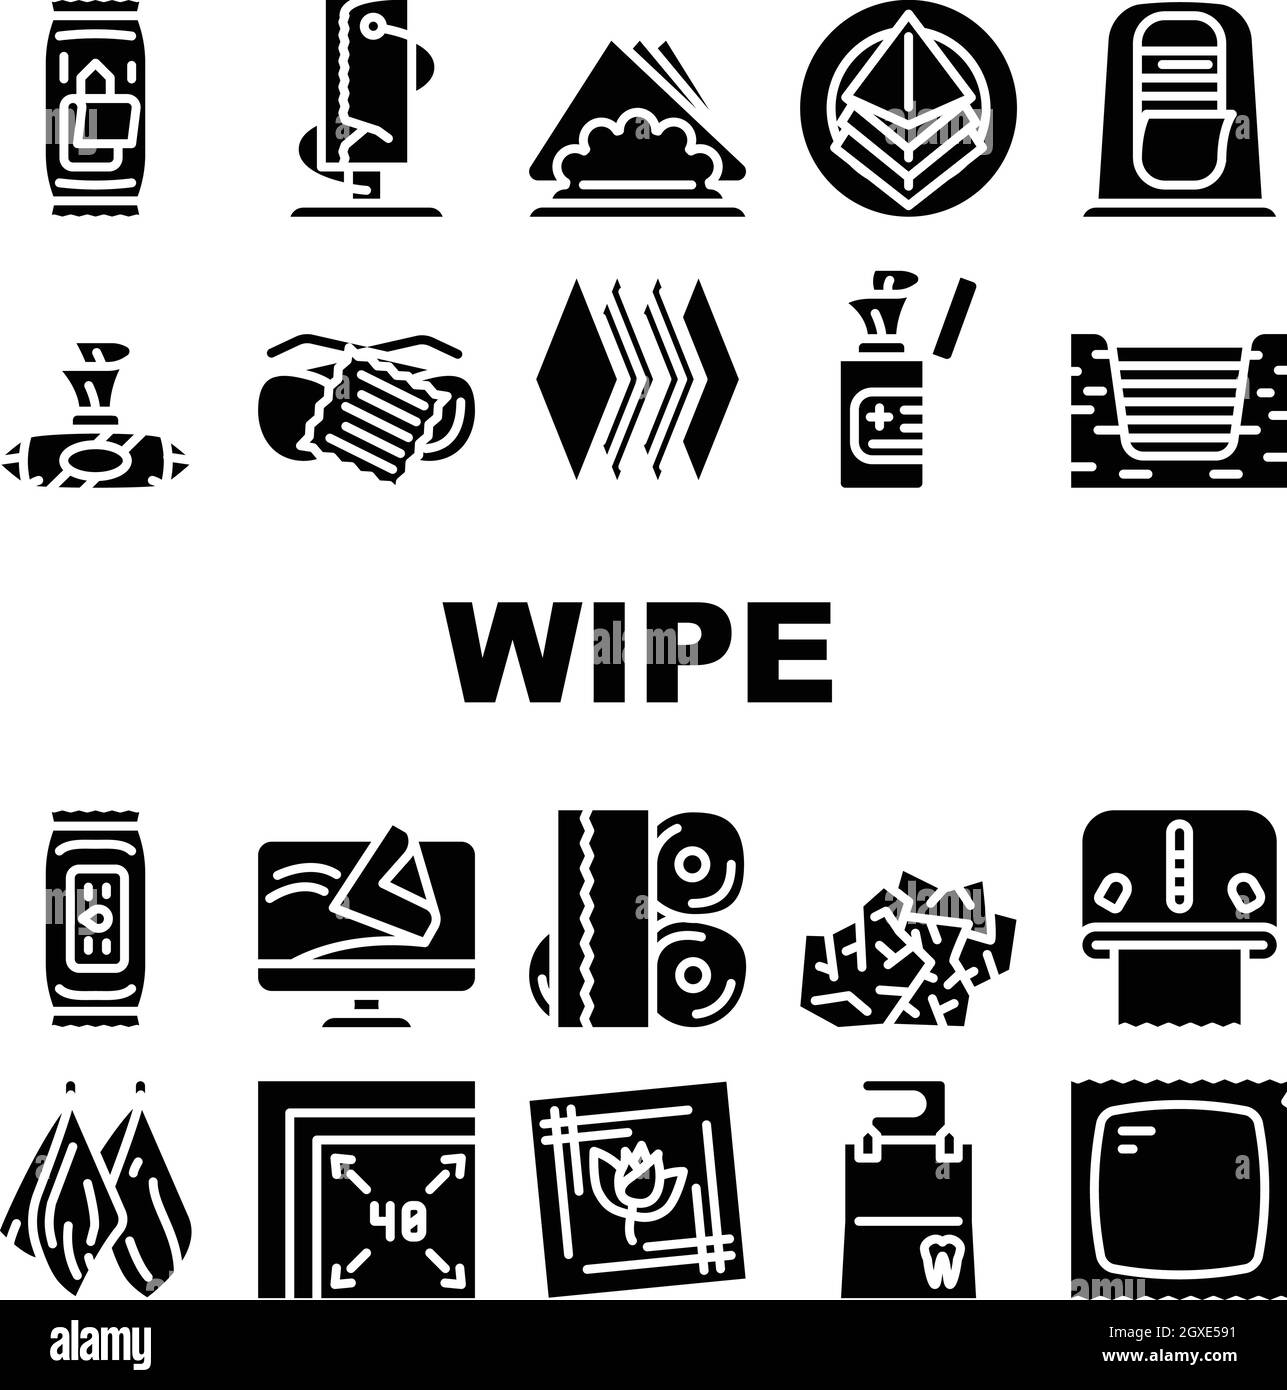 Wipe Hygiene Accessory Collection Icons Set Vector Stock Vector